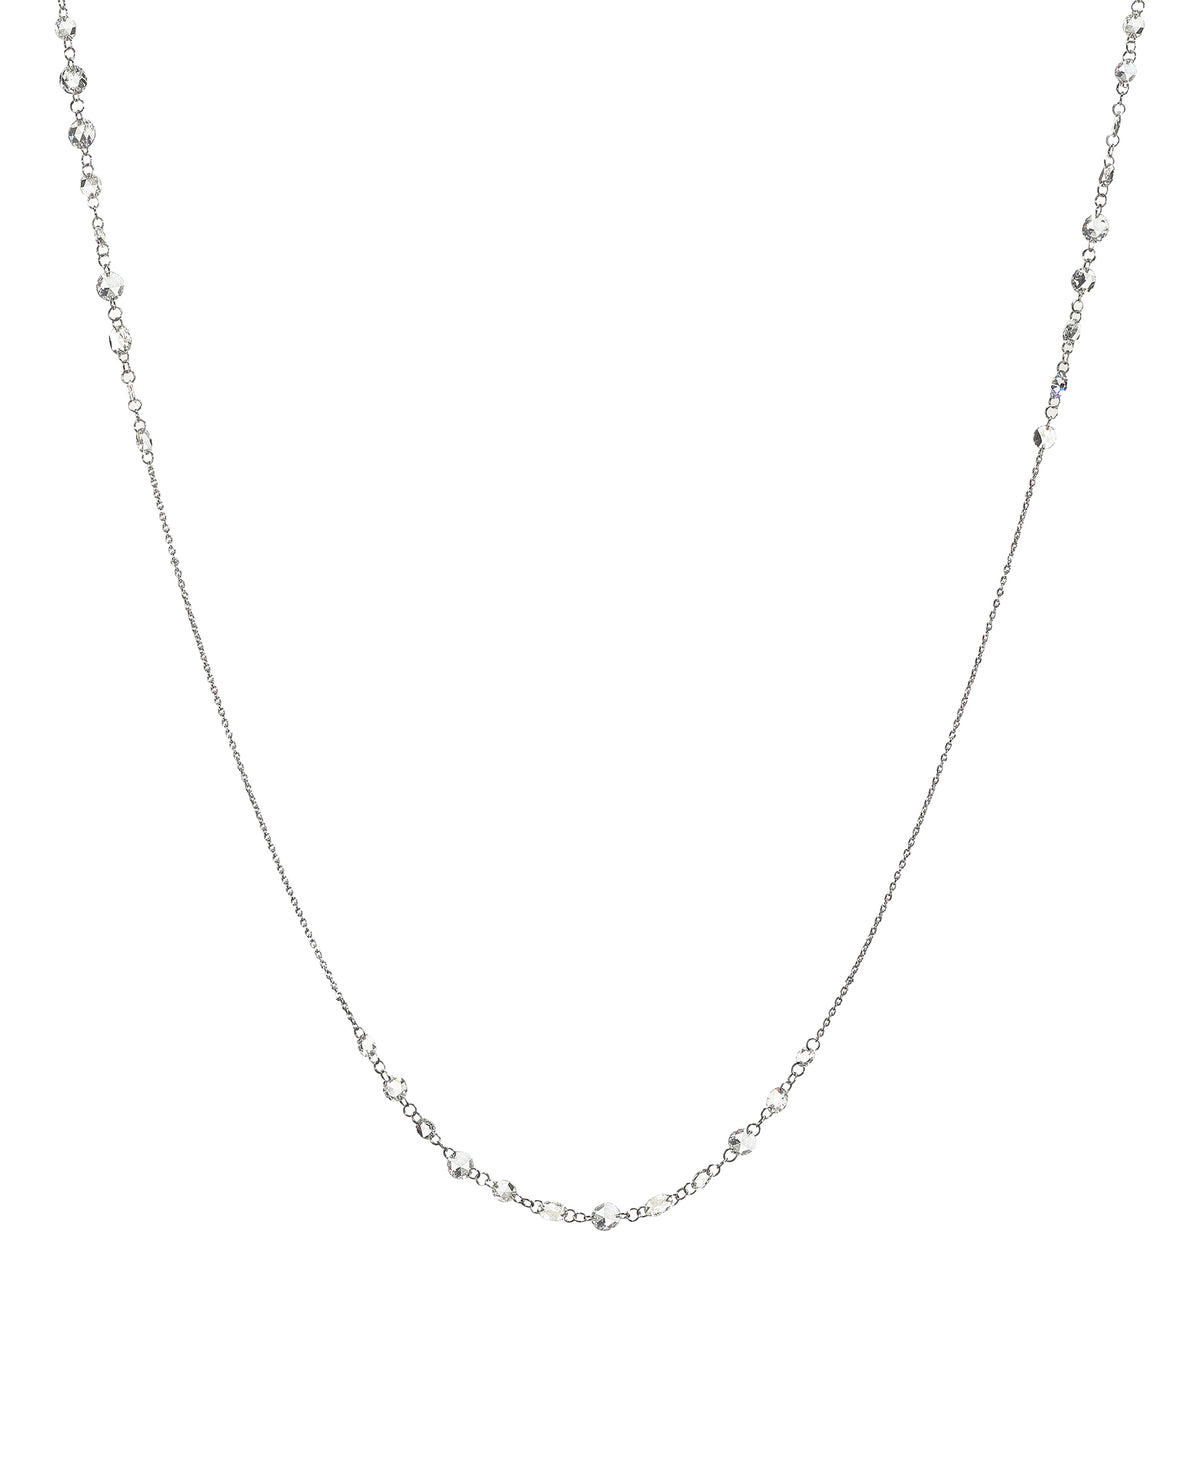 Floating Thirty-Two Diamonds Necklace